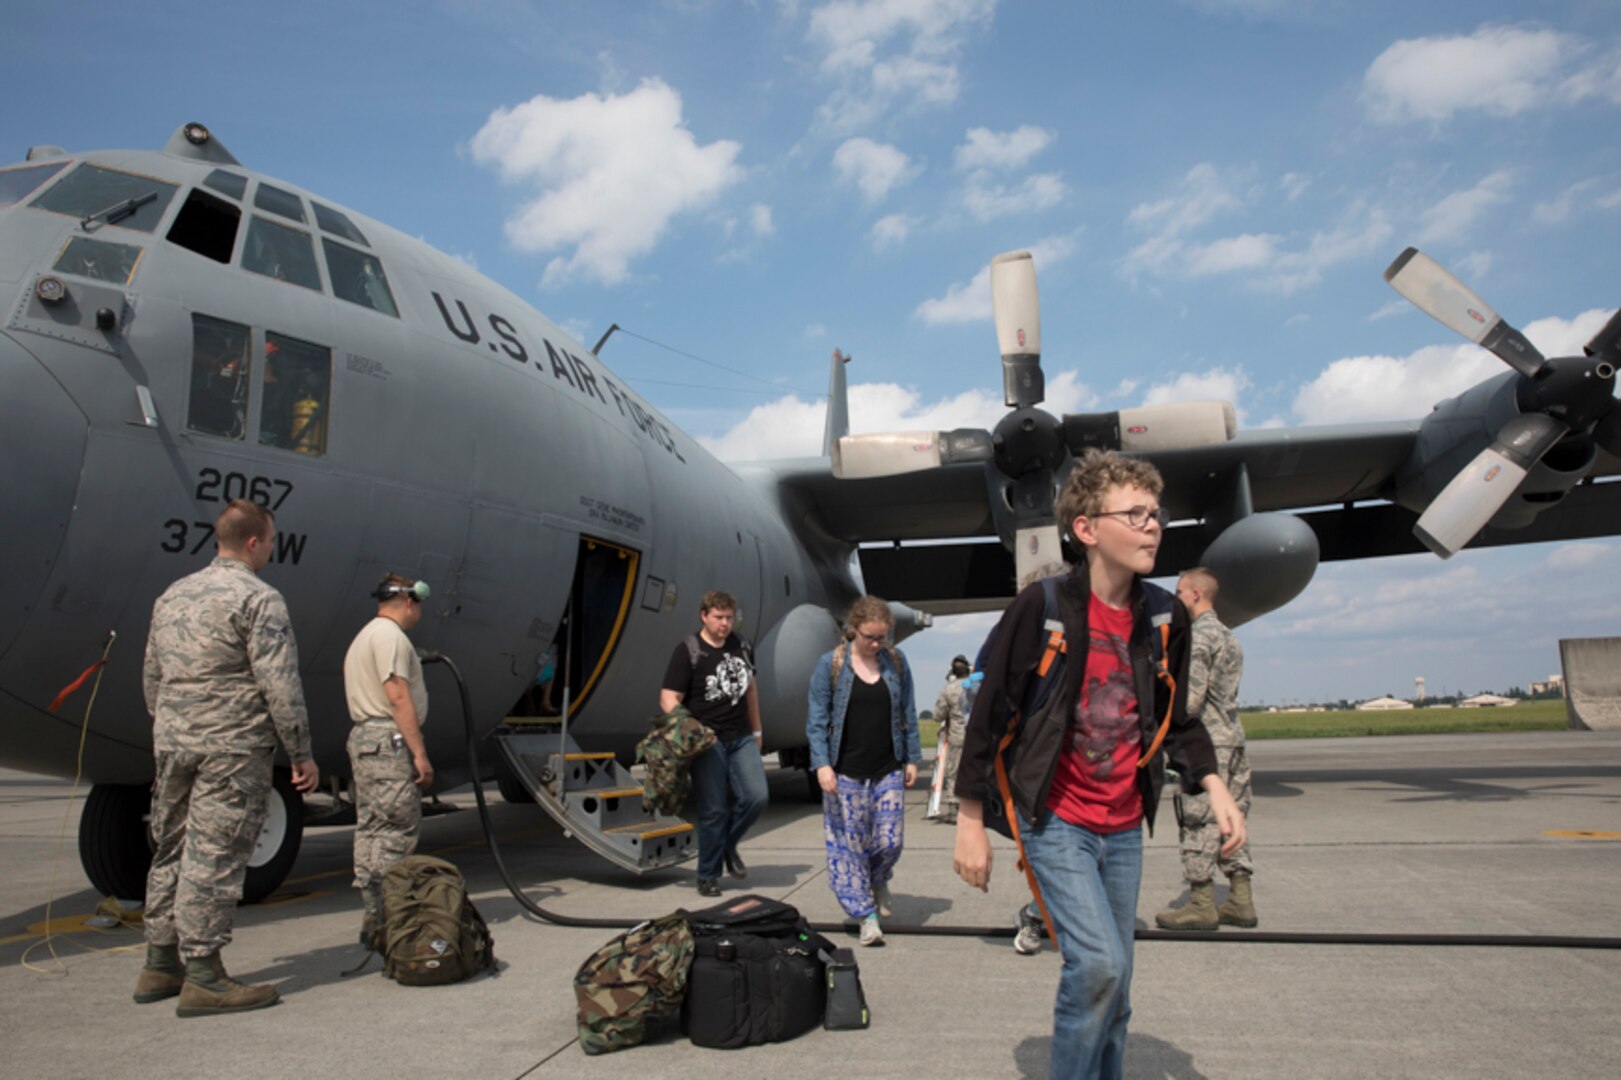 Family members representing installations and commands throughout the Korean Peninsula exist a U.S. Air Force C-130 Hercules at Yokota Air Base, Japan, June 6, 2017 for noncombatant evacuation exercise Focused Passage 2017. The exercise takes place at US military installations throughout the Korean Peninsula and is designed to ensure service members are prepared to evacuate designated noncombatants.